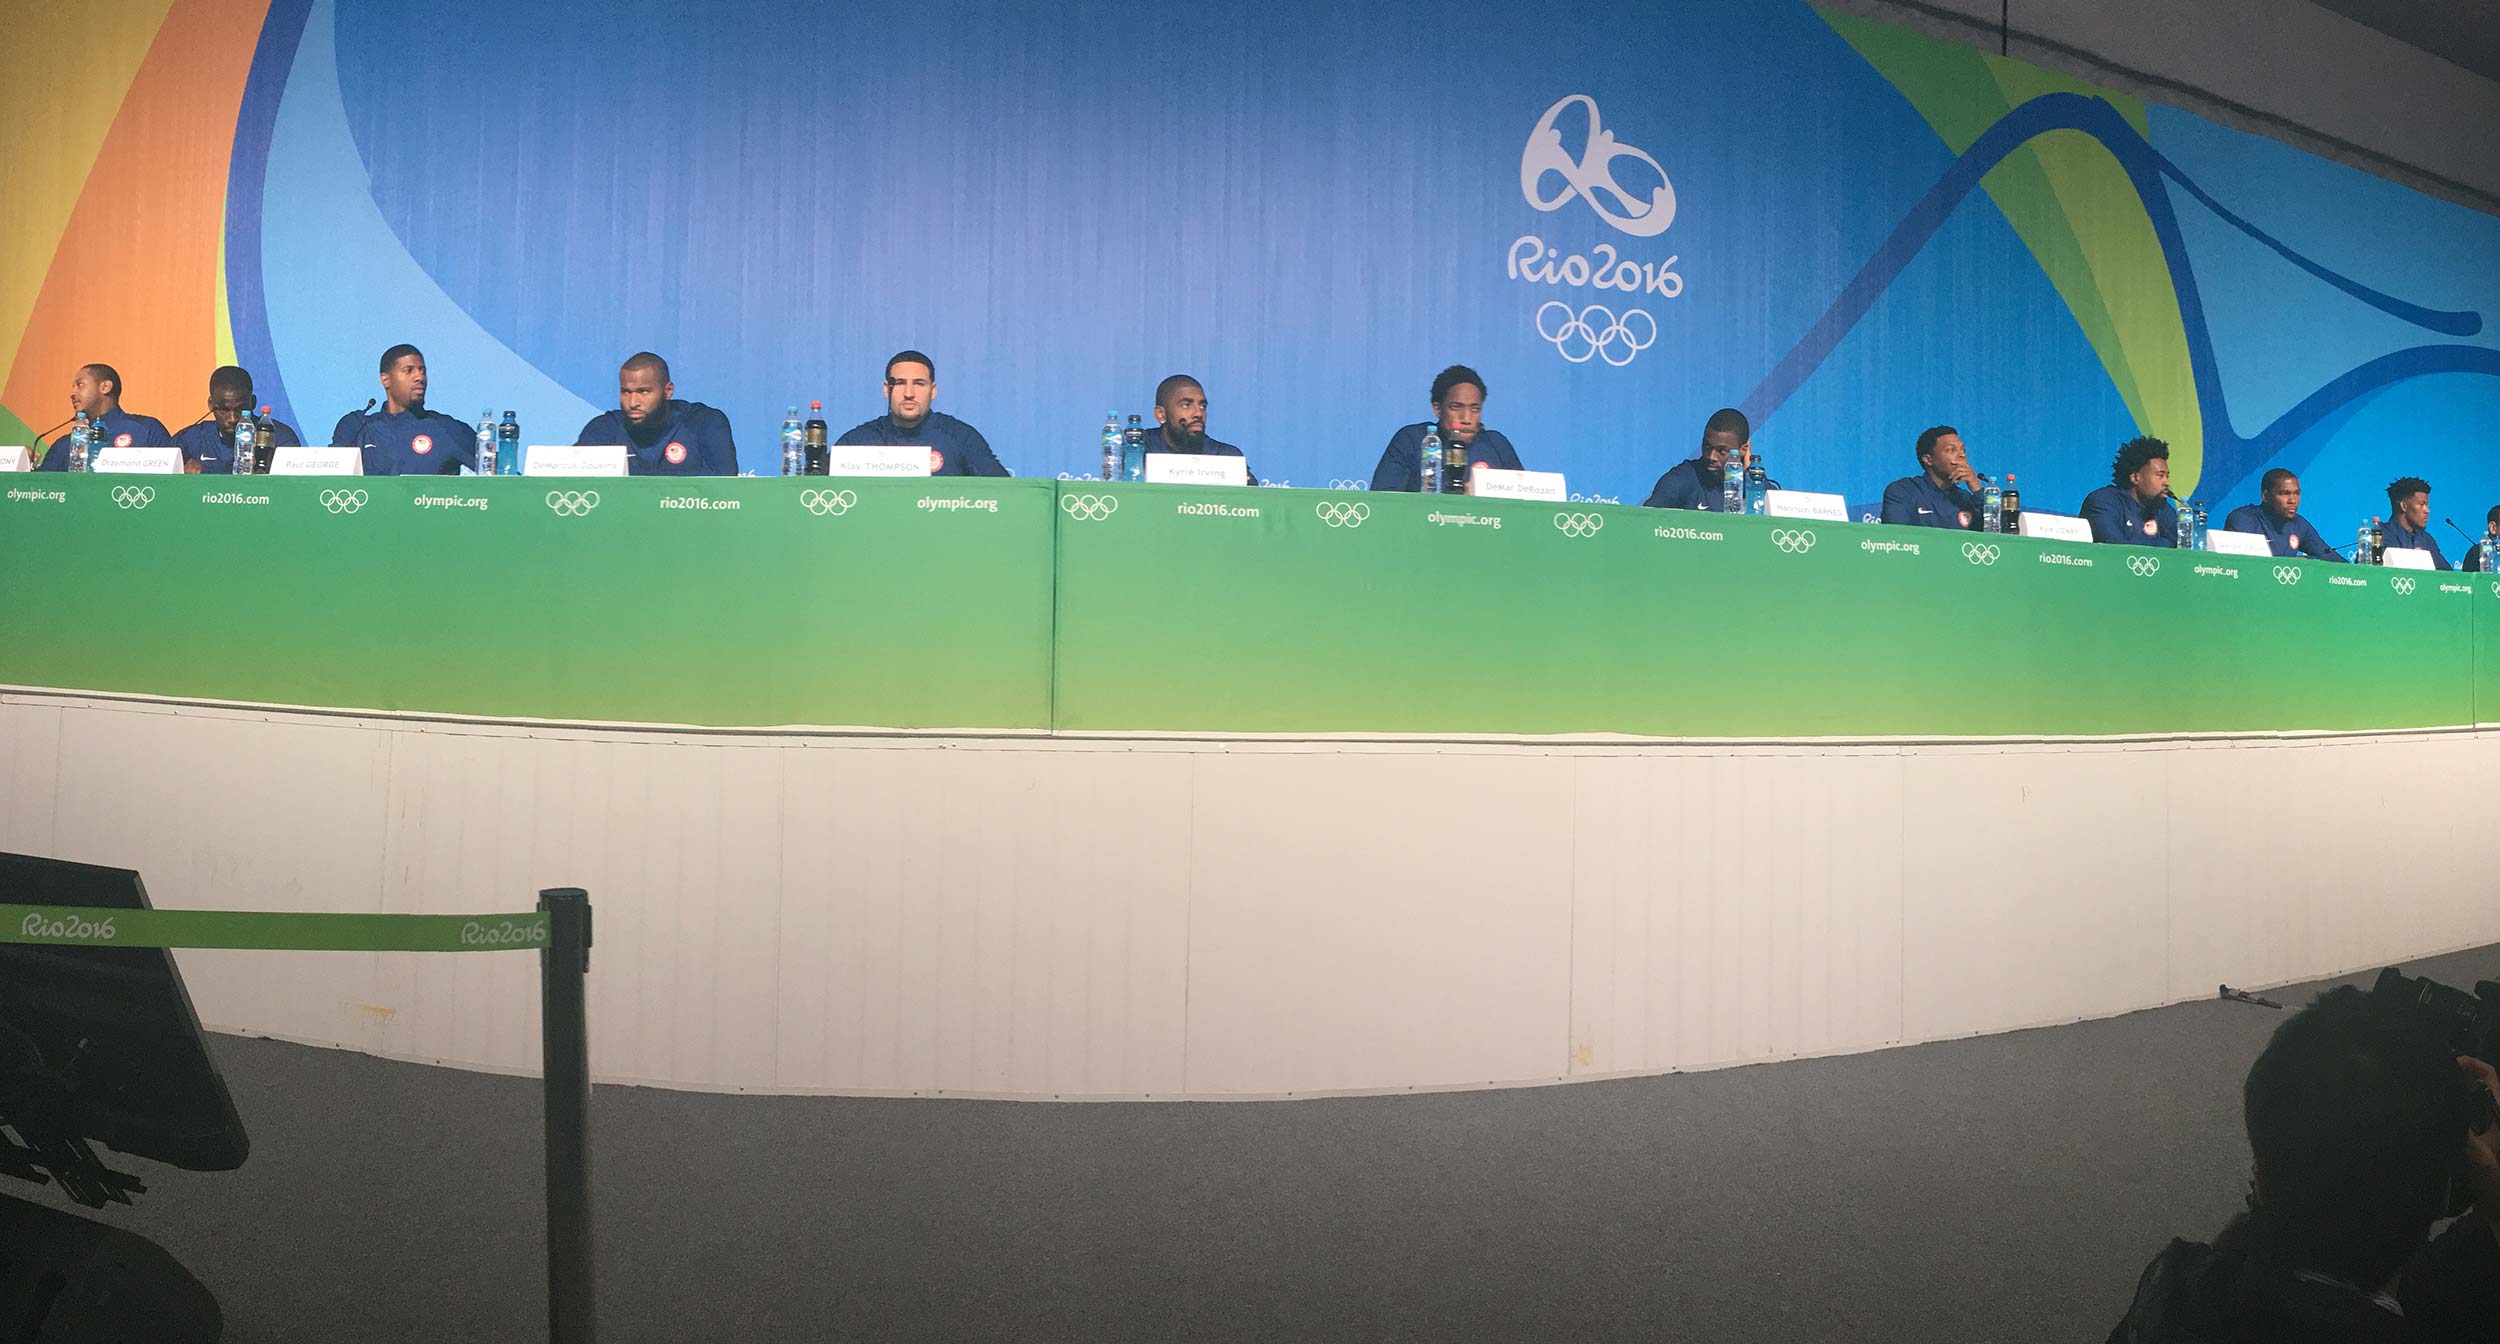 Members of the U.S. men's basketball team at a press conference in Rio de Janeiro